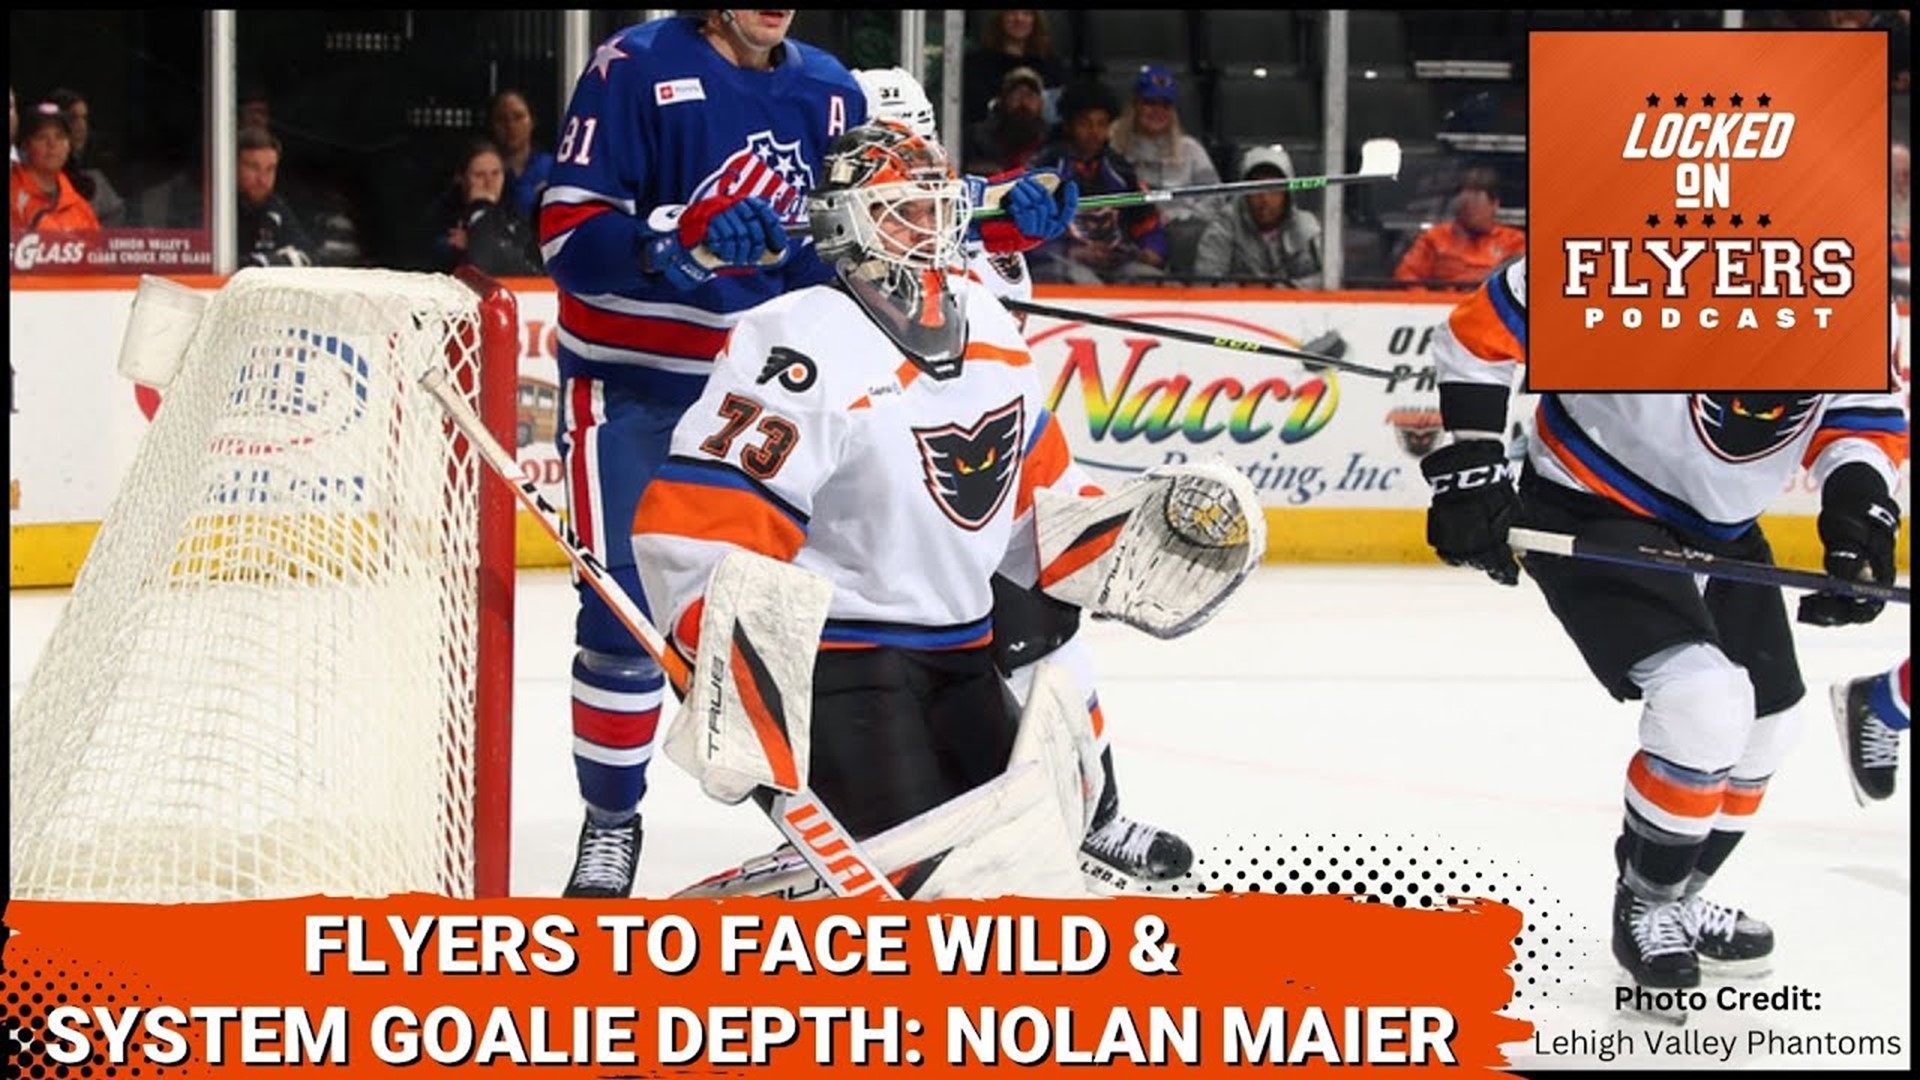 We preview tonight’s matchup vs the Minnesota Wild.  Nolan Maier is a bit of an unknown goalie to many Flyers fans - we catch you up with his Phantoms tenure.